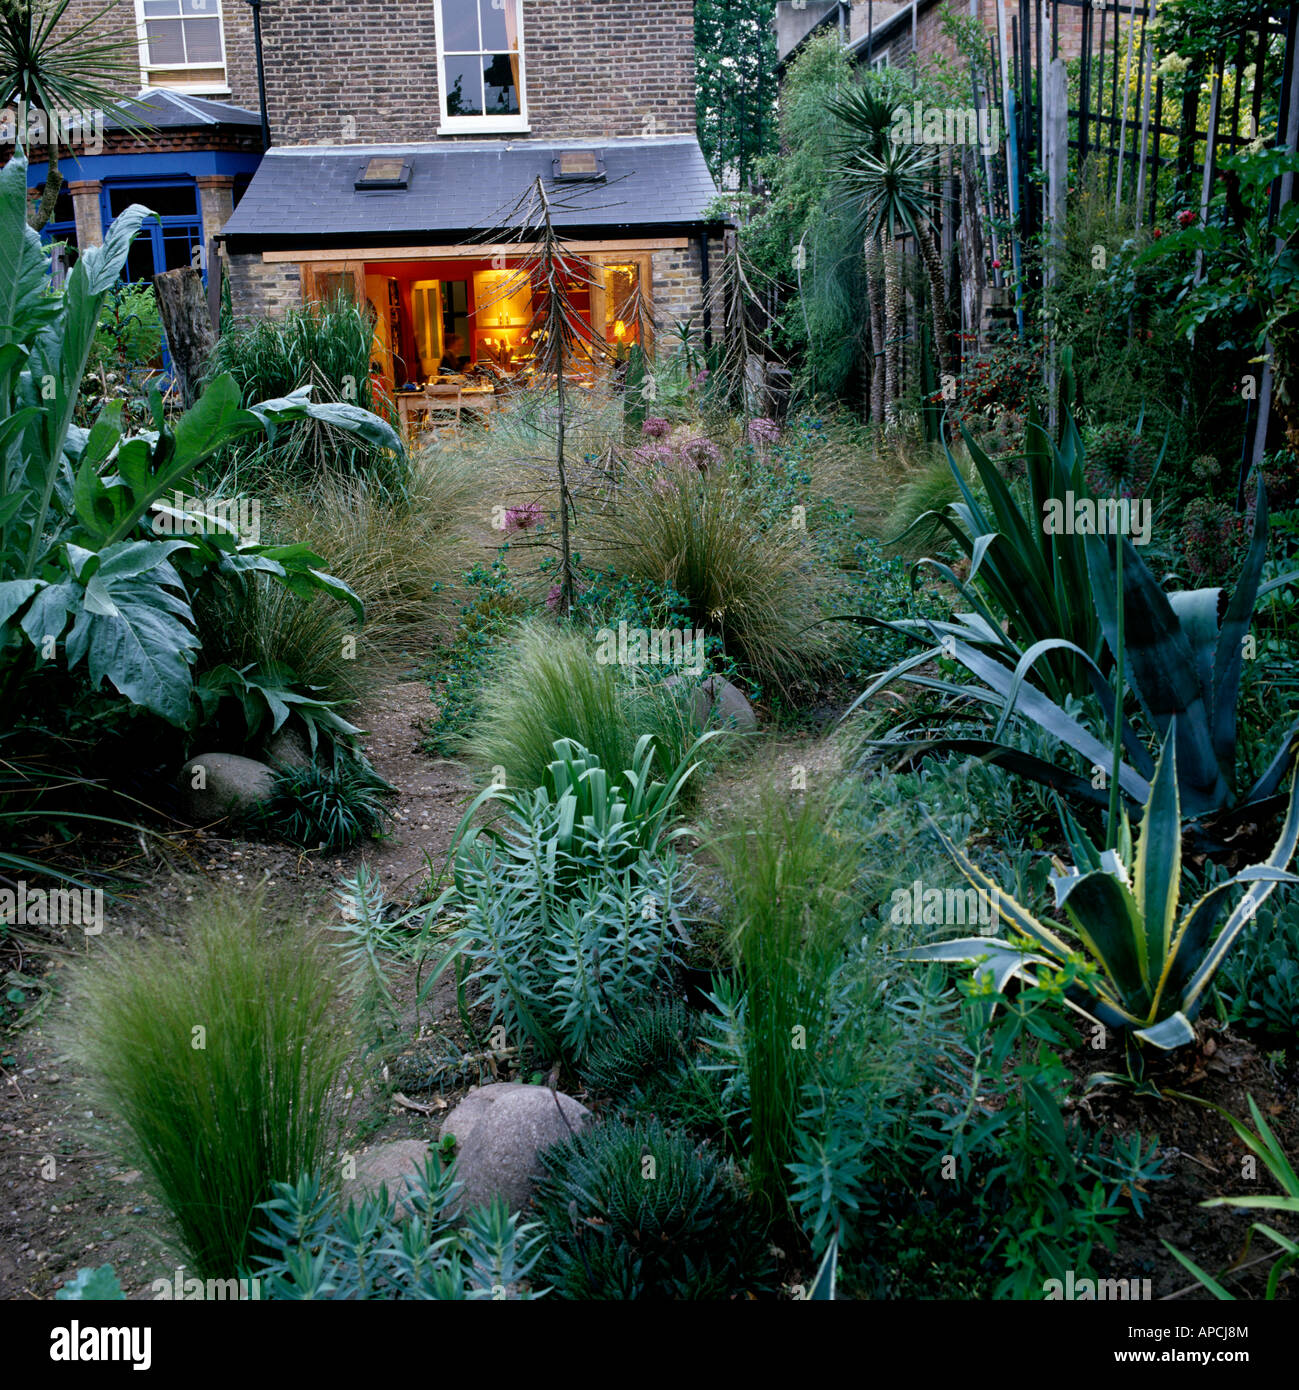 London garden planted with yucca and low growing New Zealand grasses Stock Photo